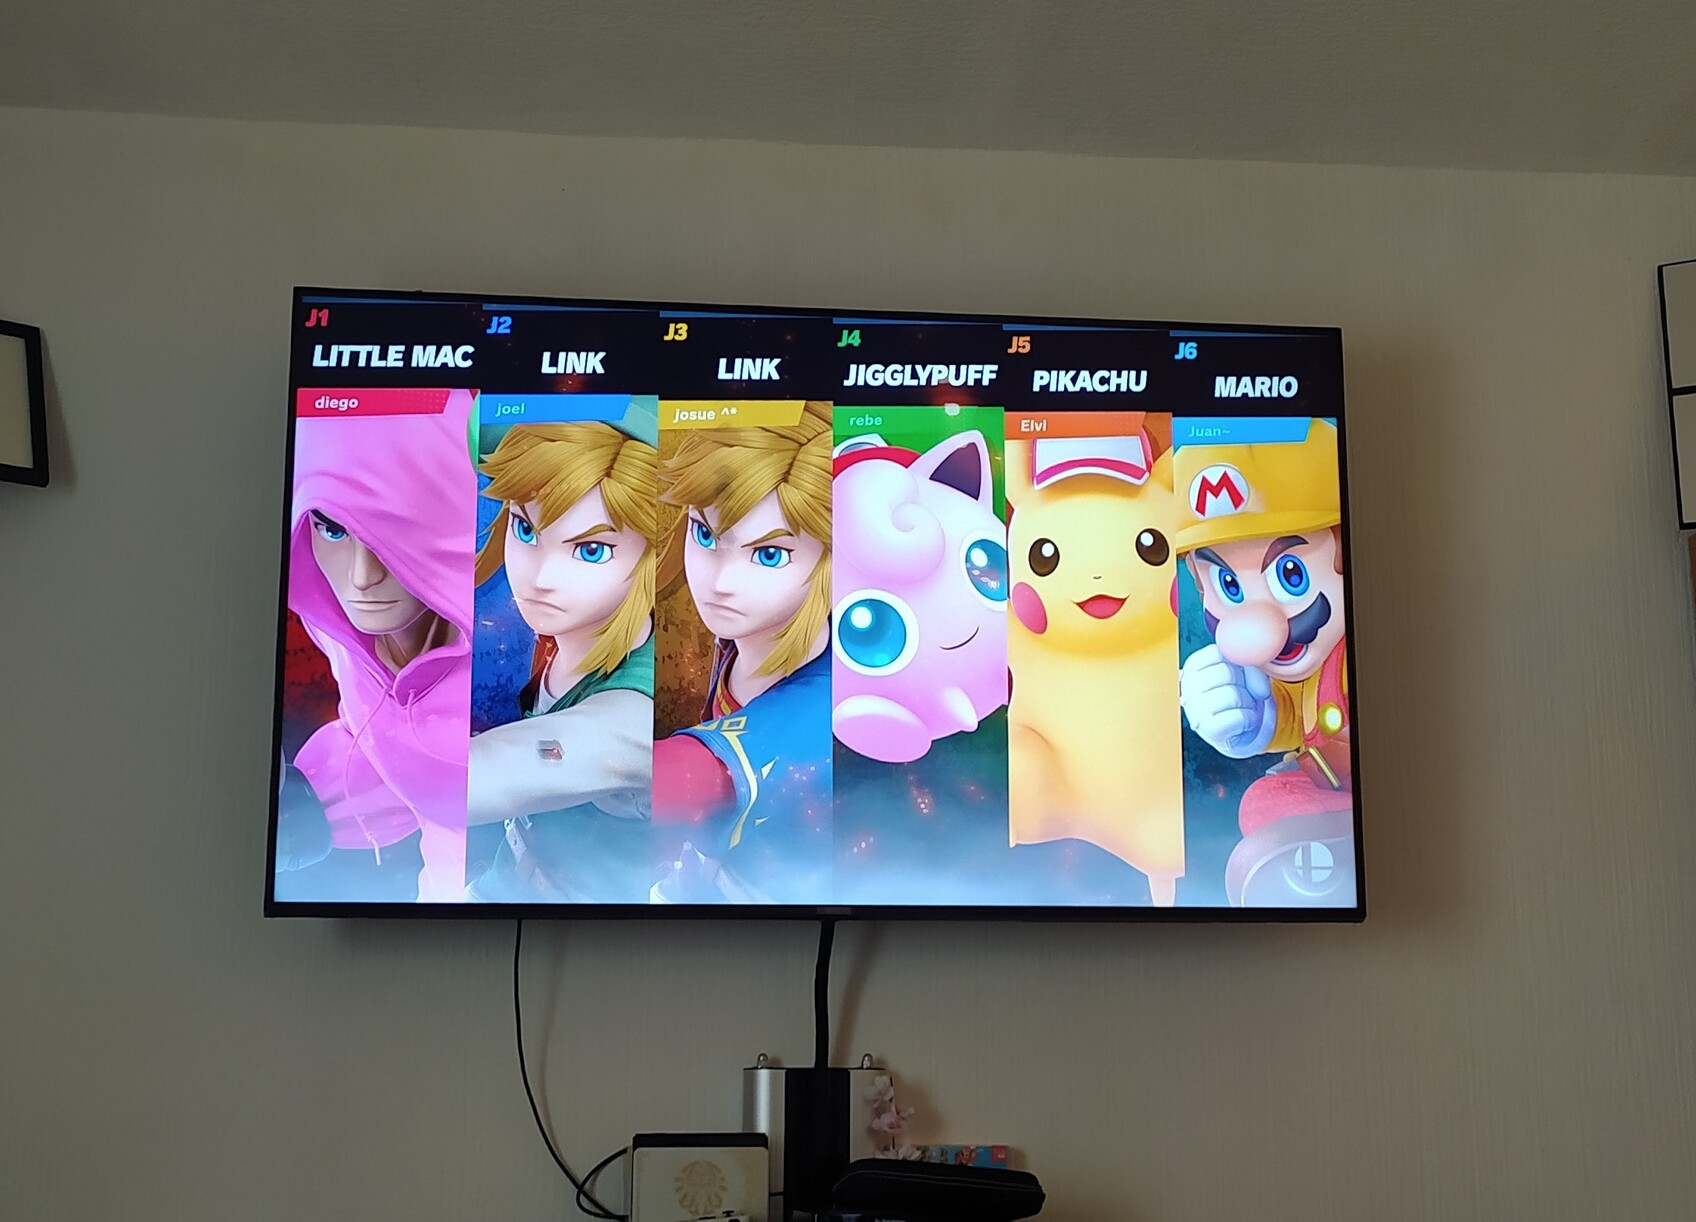 Smash Bros screen featuring a 6 player battle